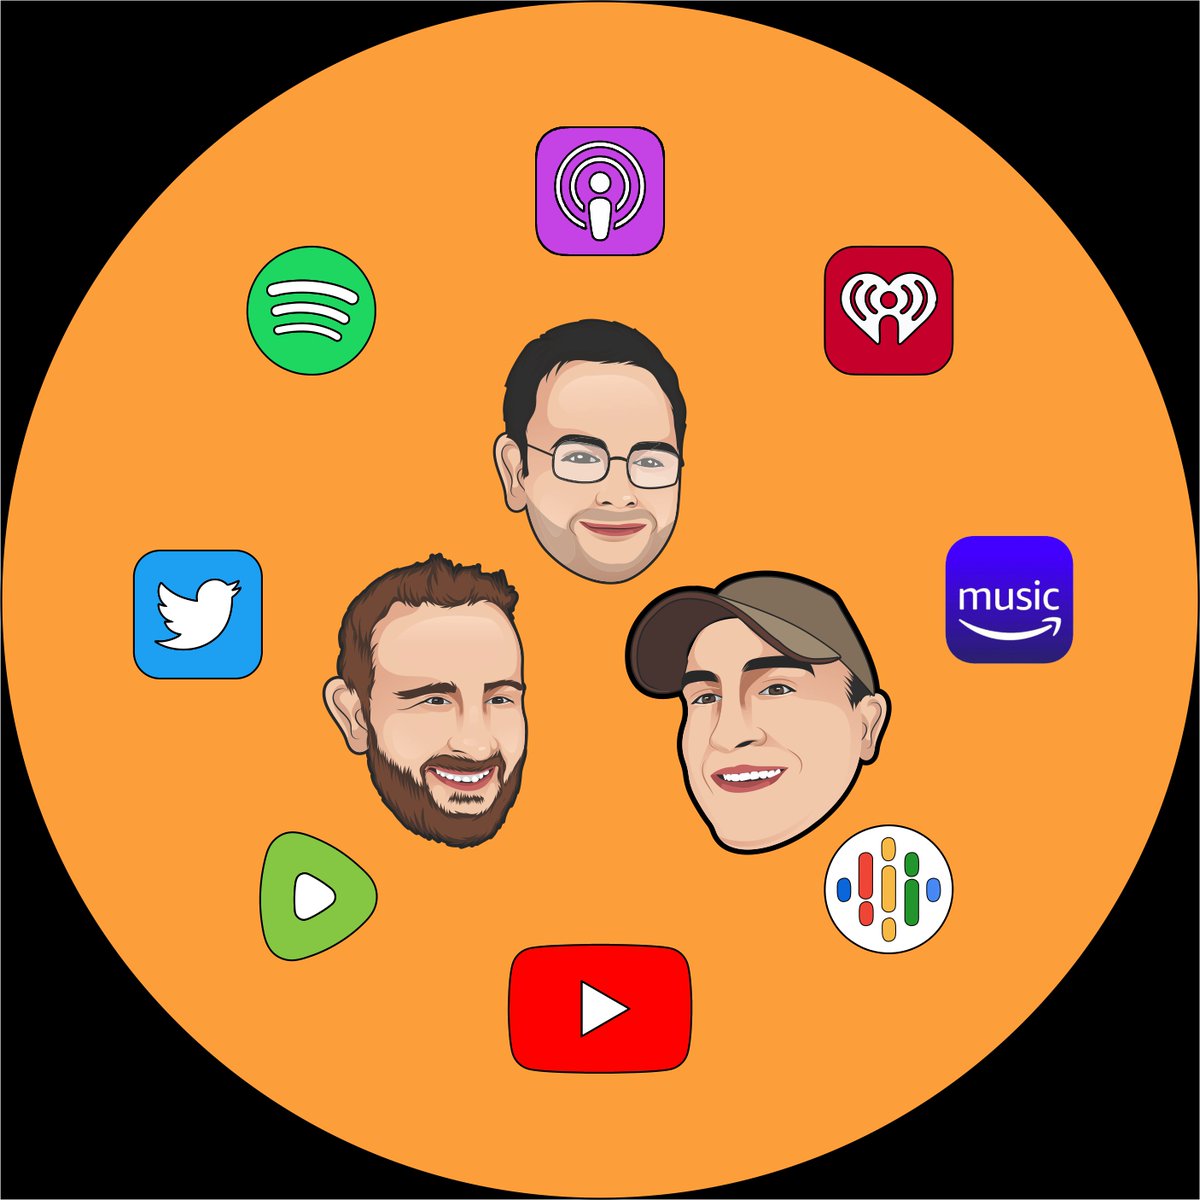 The Maturely Immature Podcast is now available on most major streaming services.  Listen anytime or anywhere with your favorite service.  #Twitter full episodes coming! @PlayMorePods #PodcastsOnAmazonMusic #Spotify #iHeartRadio #ApplePodcasts #RumbleVideo #Youtube #GooglePodcast